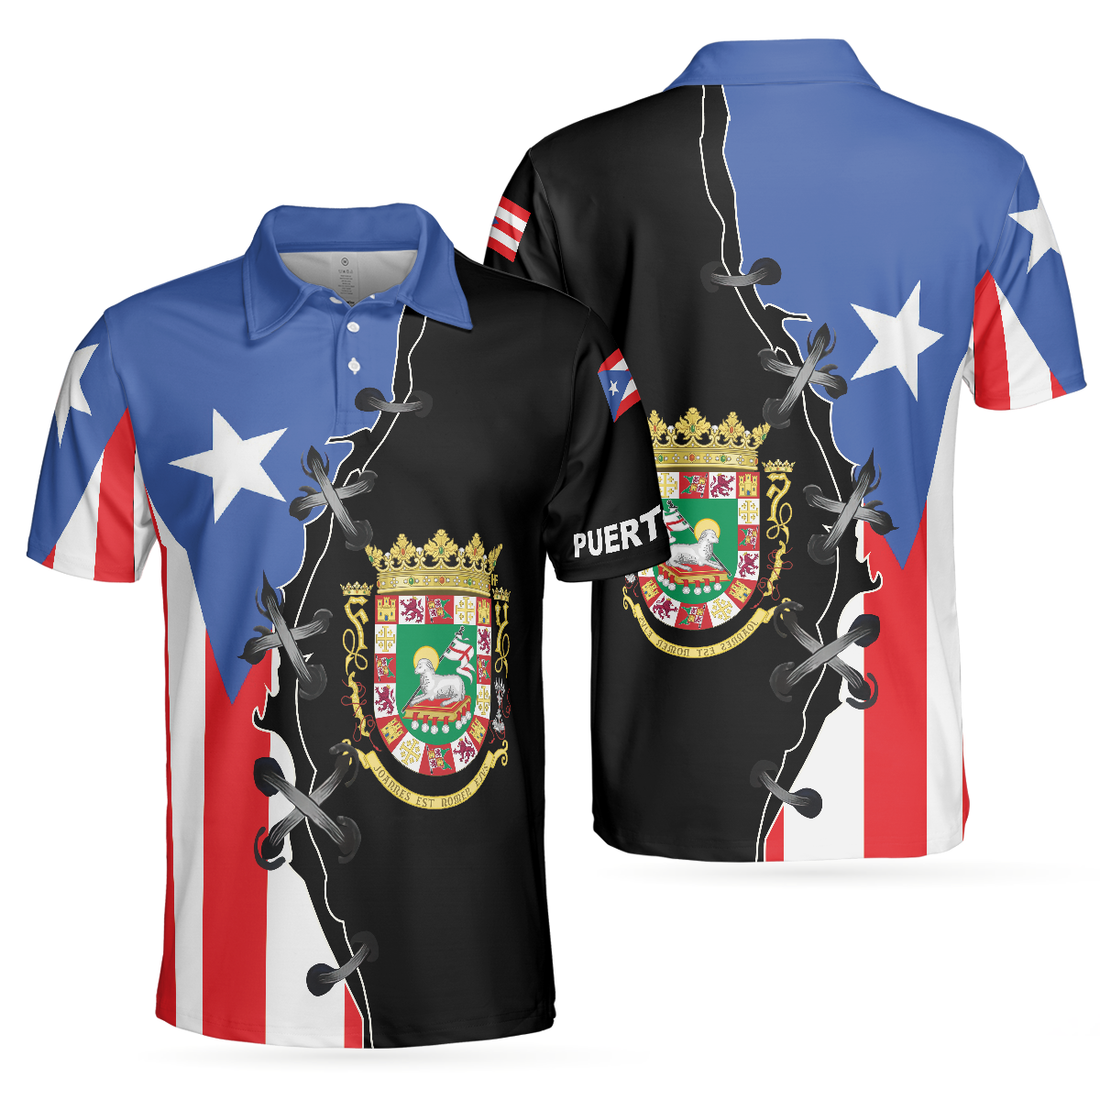 Puerto Rico Polo Shirt Puerto Rico Flag Polo Shirt Design For Adults Best American Fans Gift Idea - 1